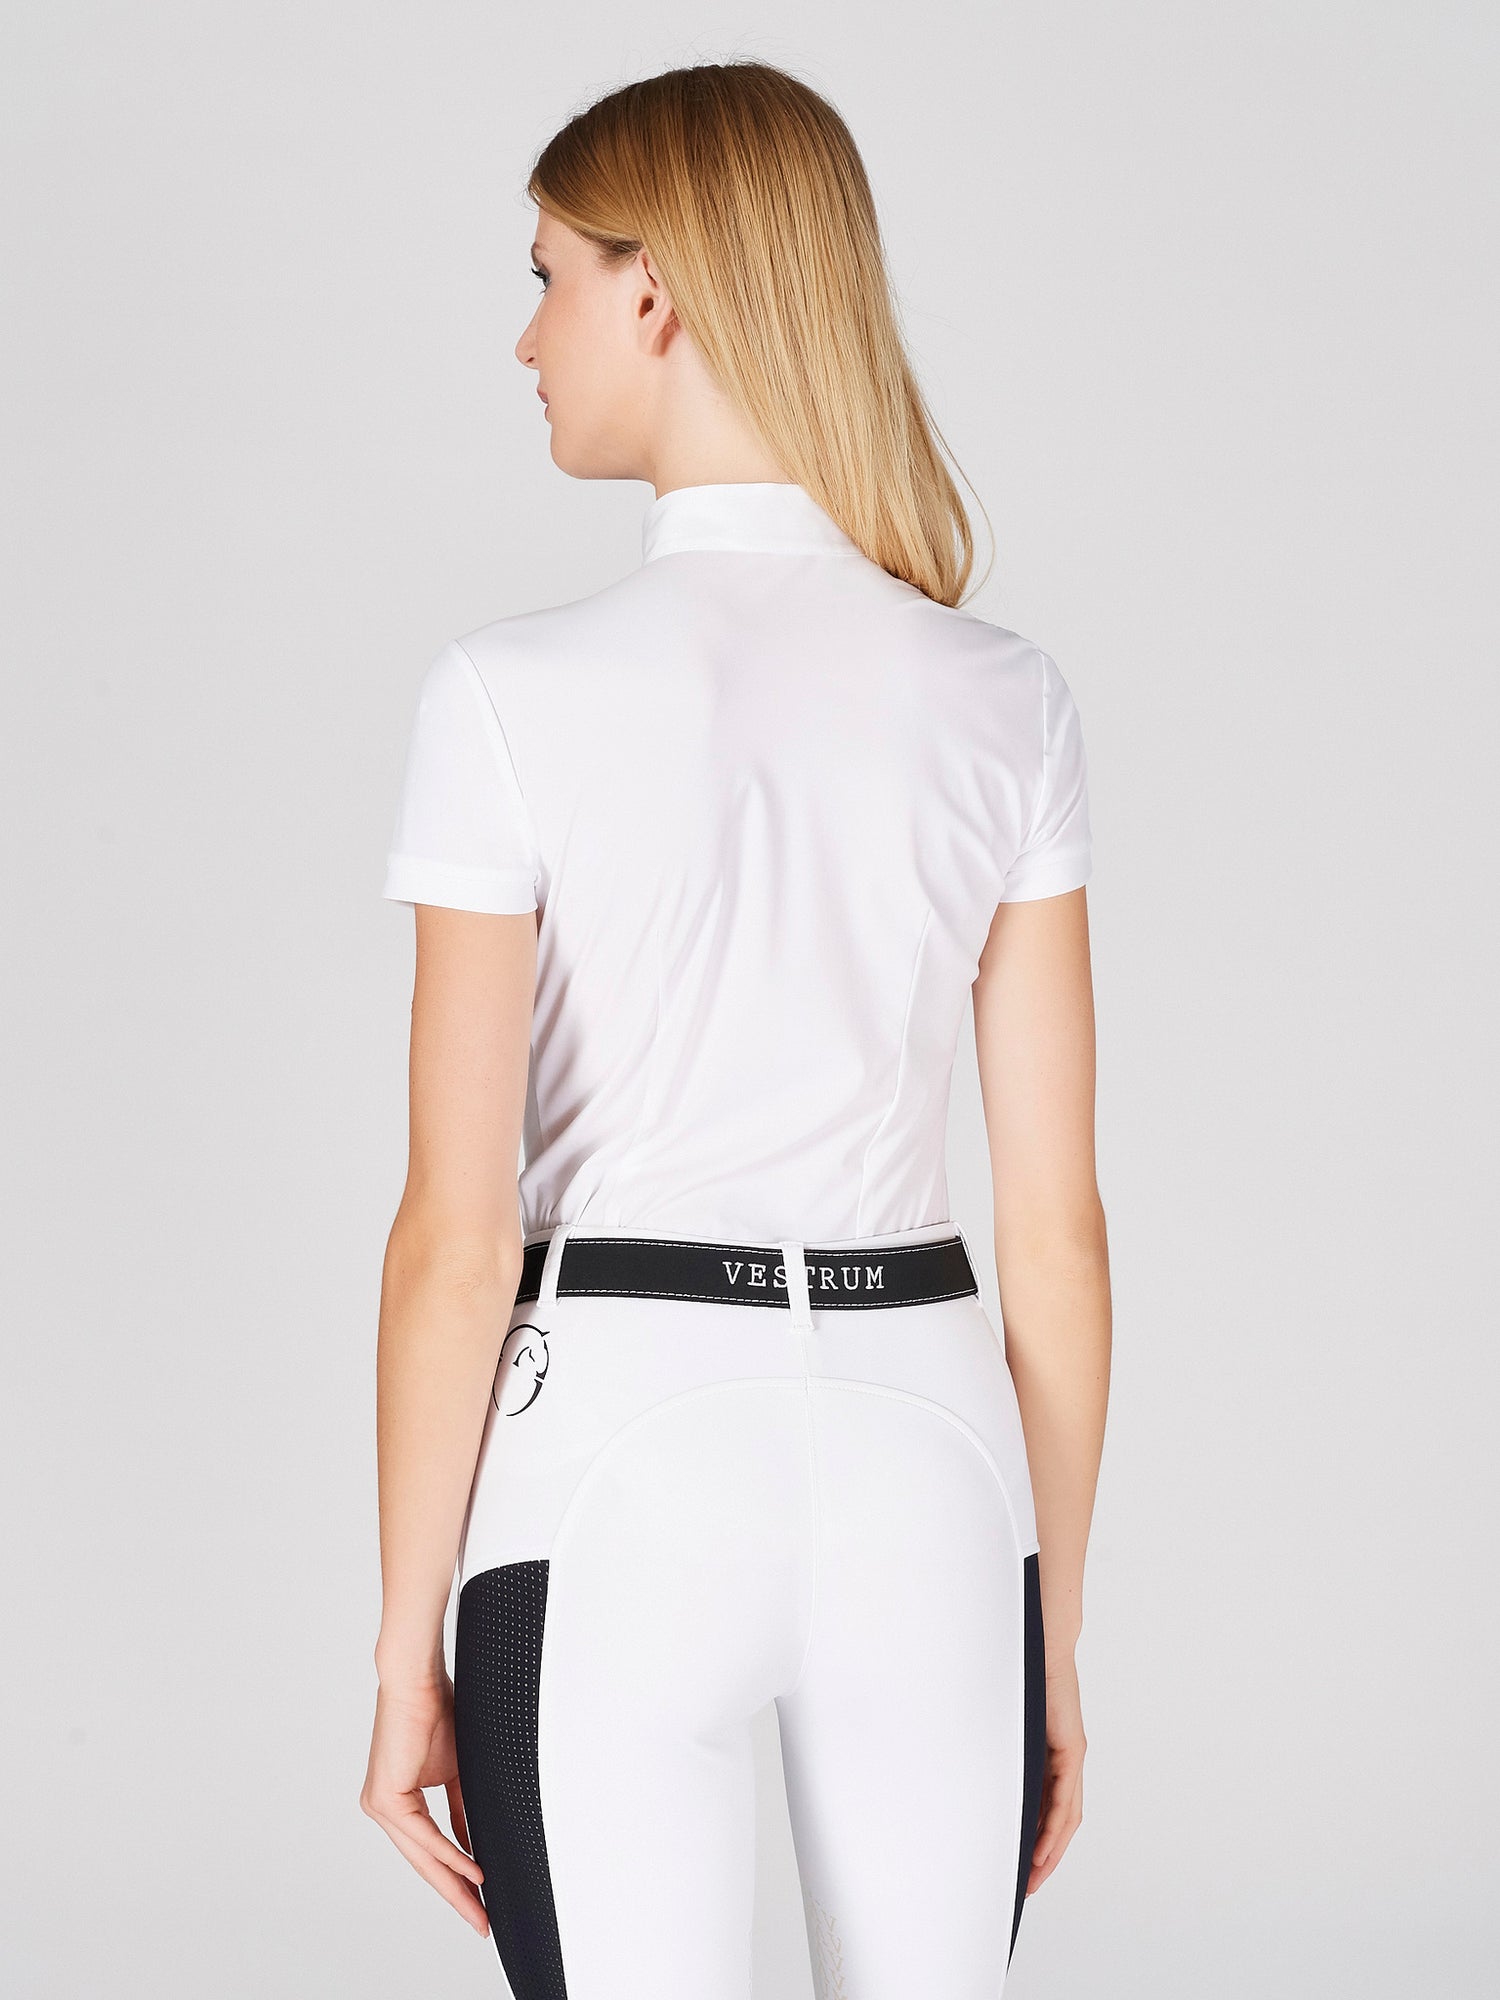 The Vestrum Maratea white Show Shirt is an update on a classic white shirt. The show shirt is made from bi stretch technical fabric for maximum movement and comfort. The black shine design features the Vestrum logo within the design.    Machine washable